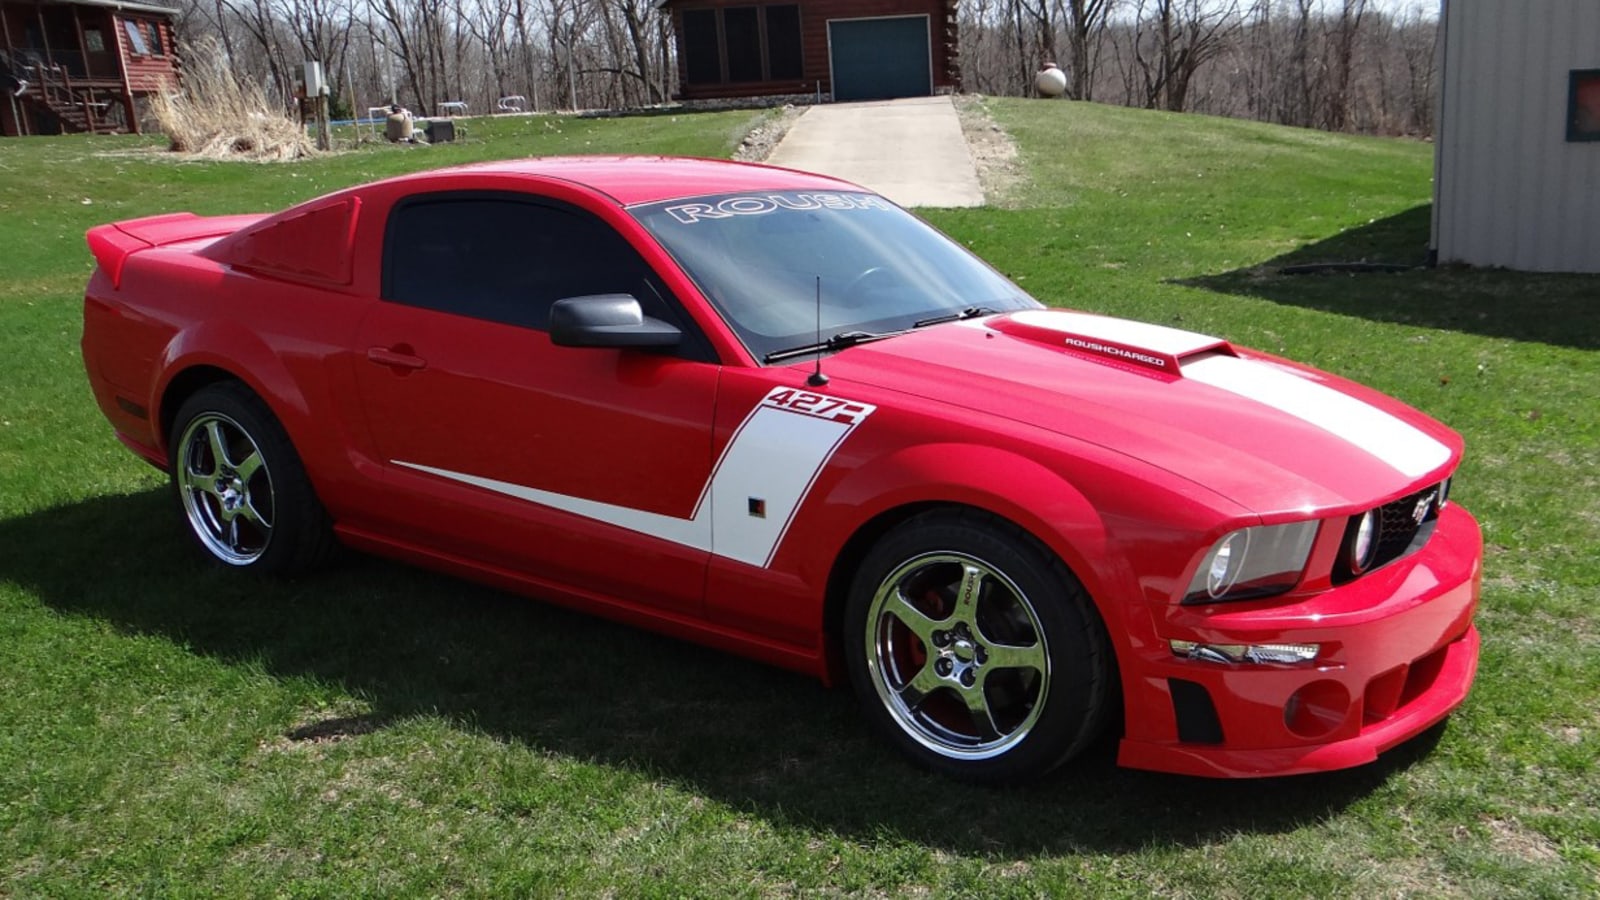 2008 Ford Mustang Roush 427R at Indy 2023 as G114 - Mecum Auctions